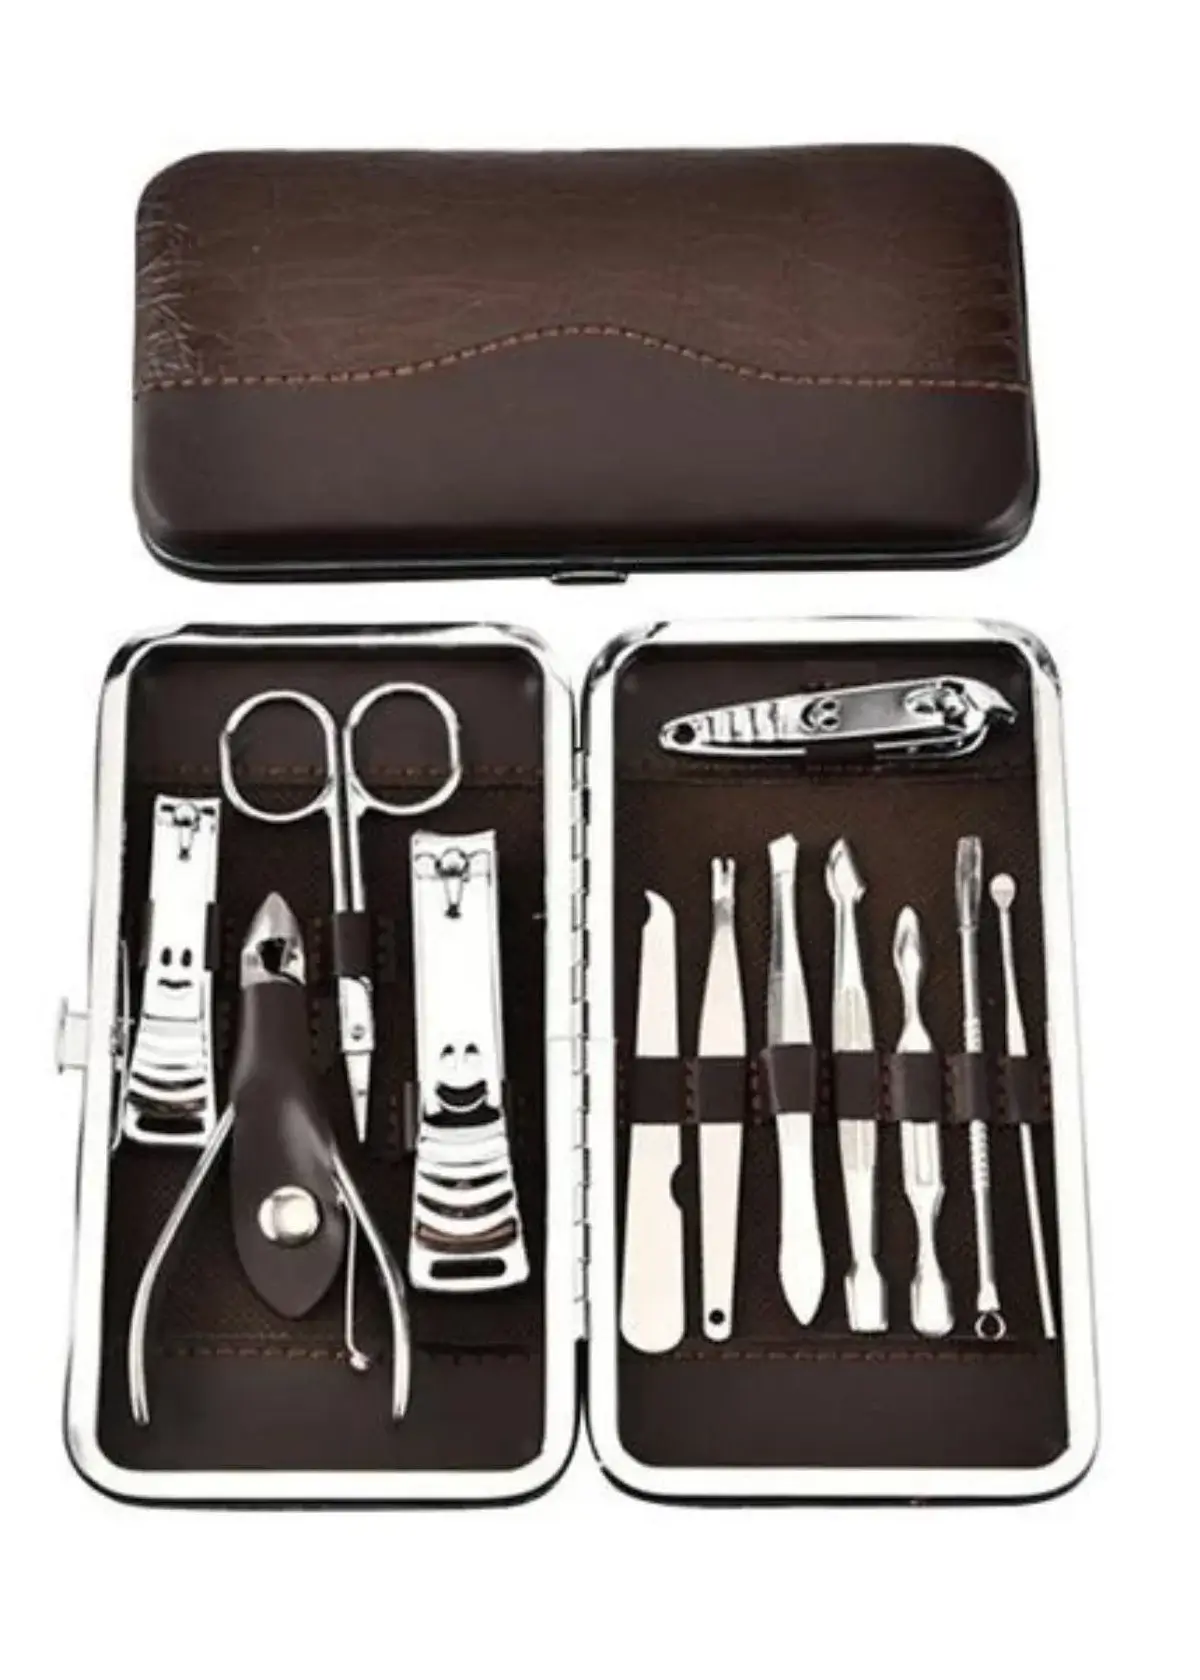 How to choose the right manicure set?